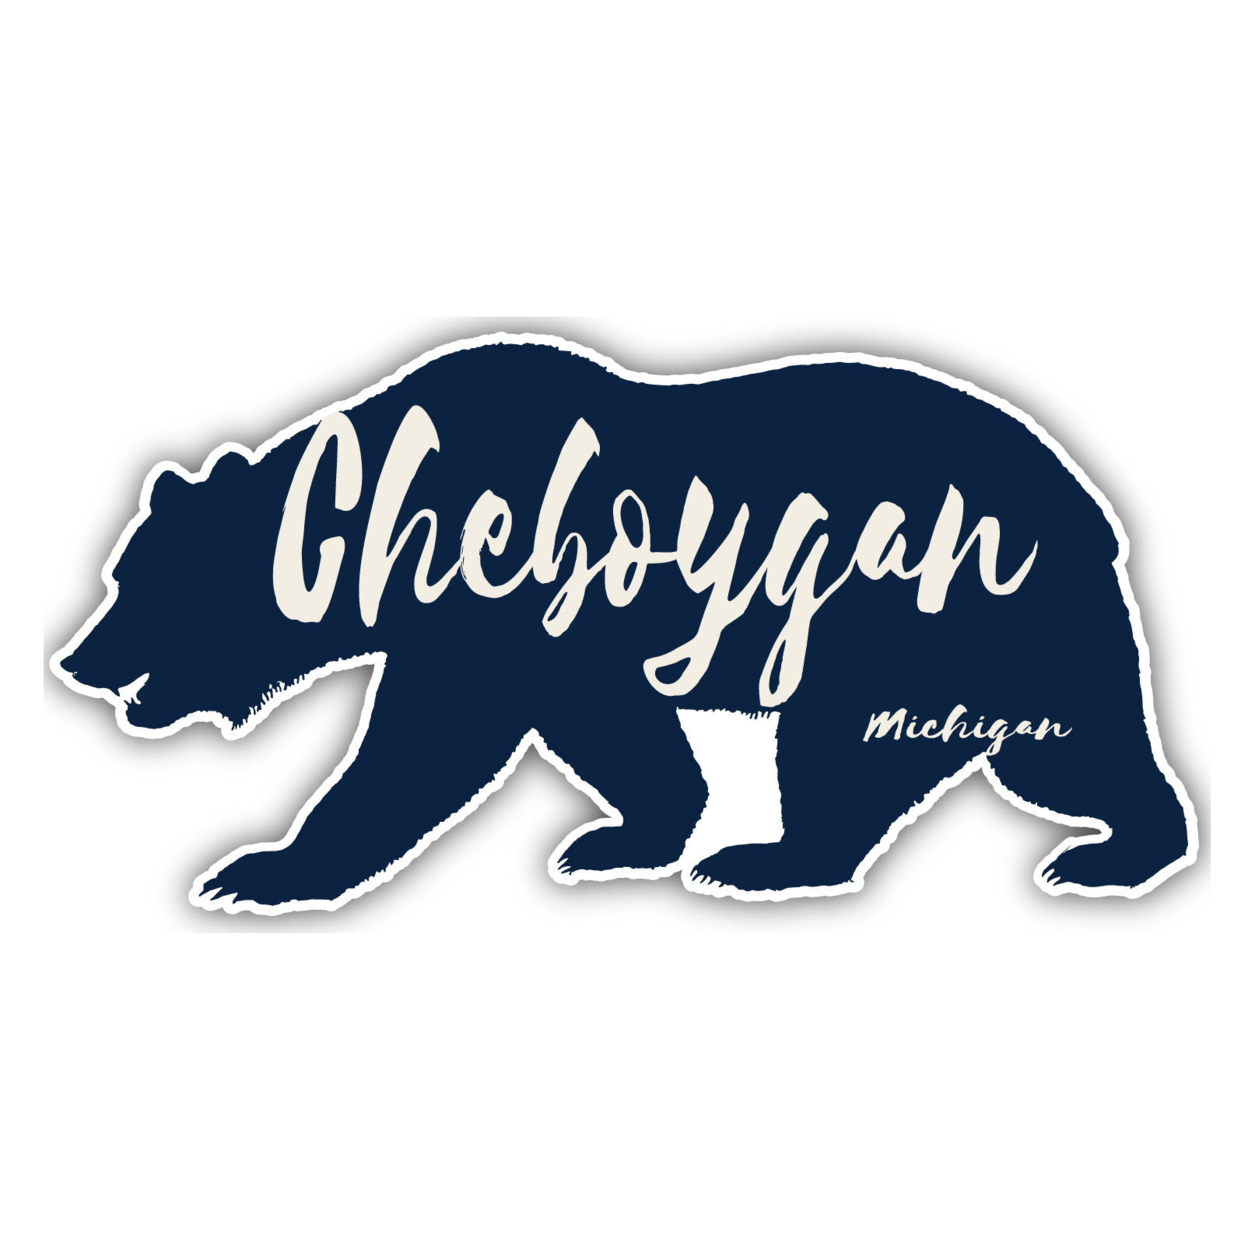 Cheboygan Michigan Souvenir Decorative Stickers (Choose Theme And Size) - 4-Pack, 12-Inch, Great Outdoors